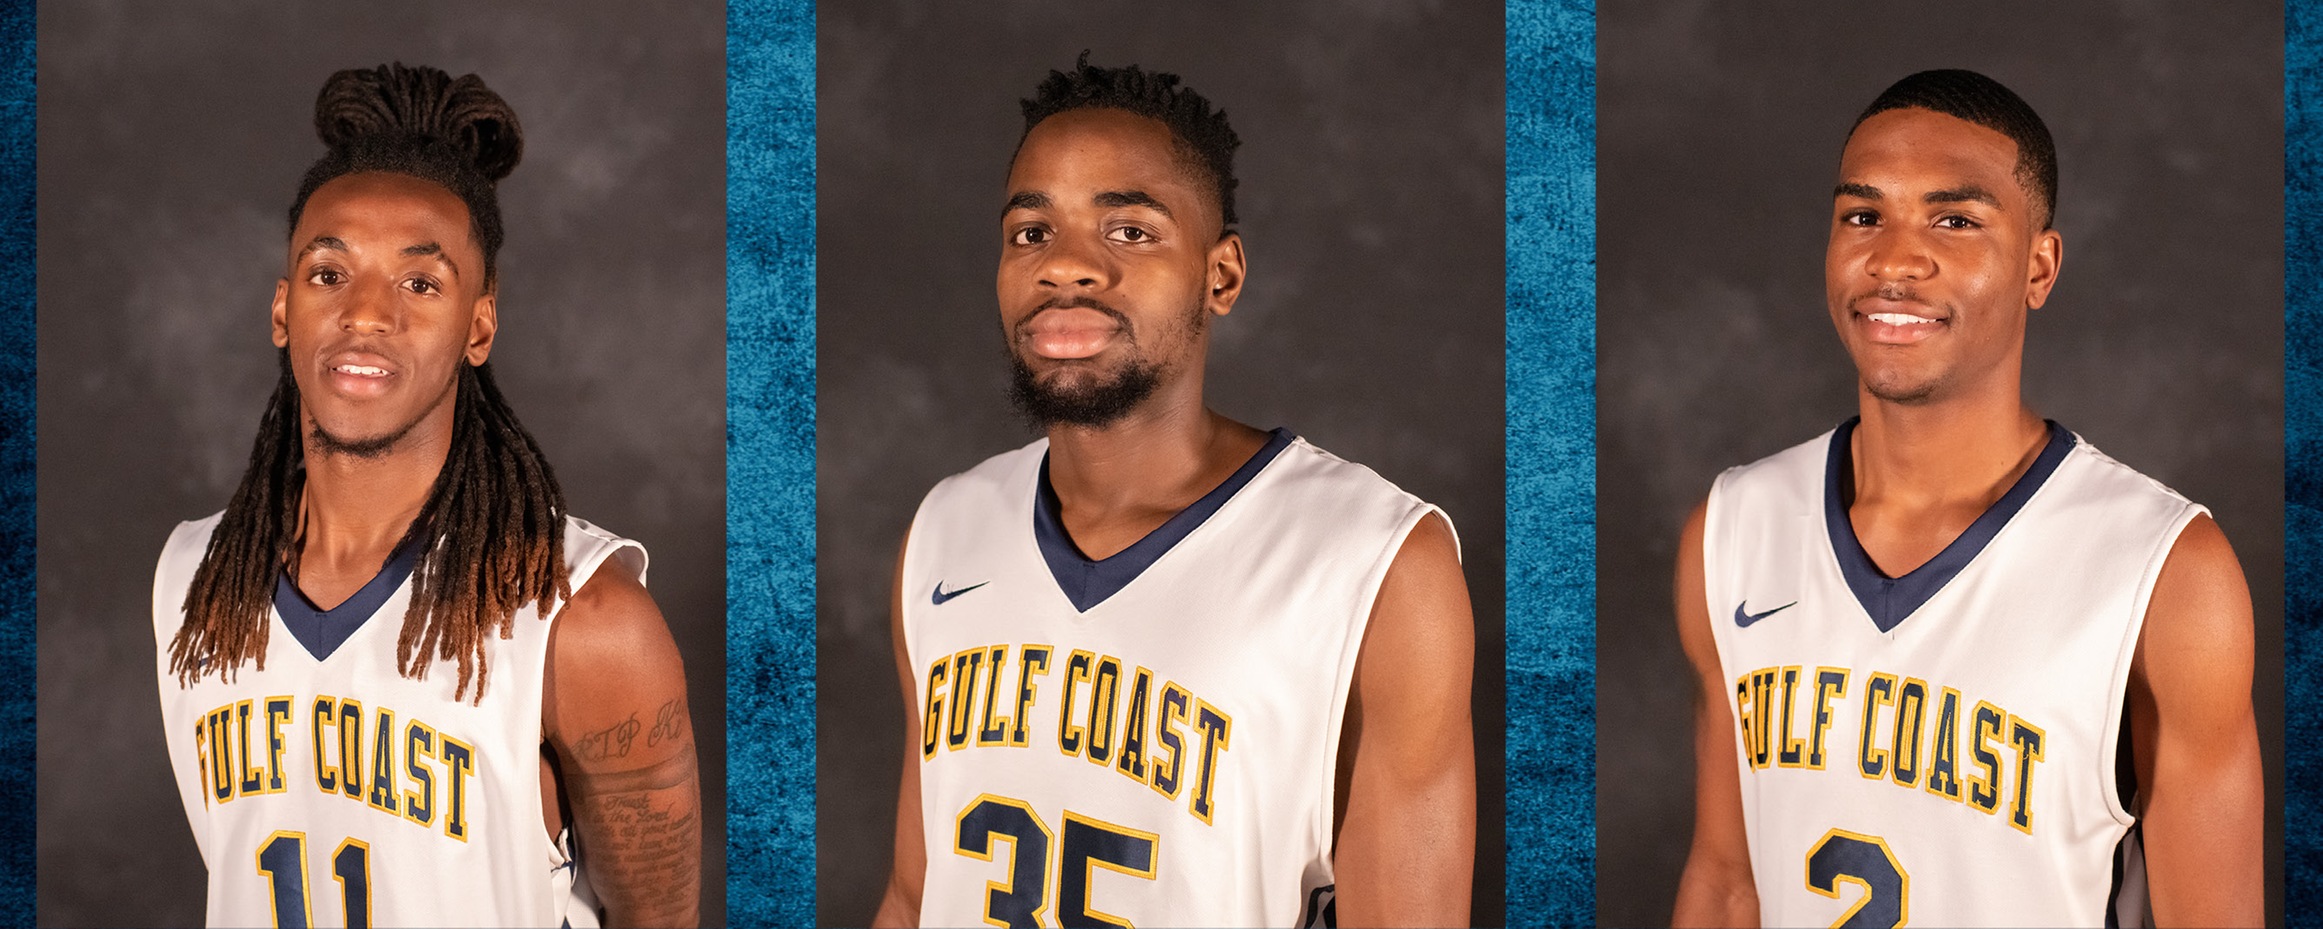 Spivery’s buzzer-beater leads to MGCCC win